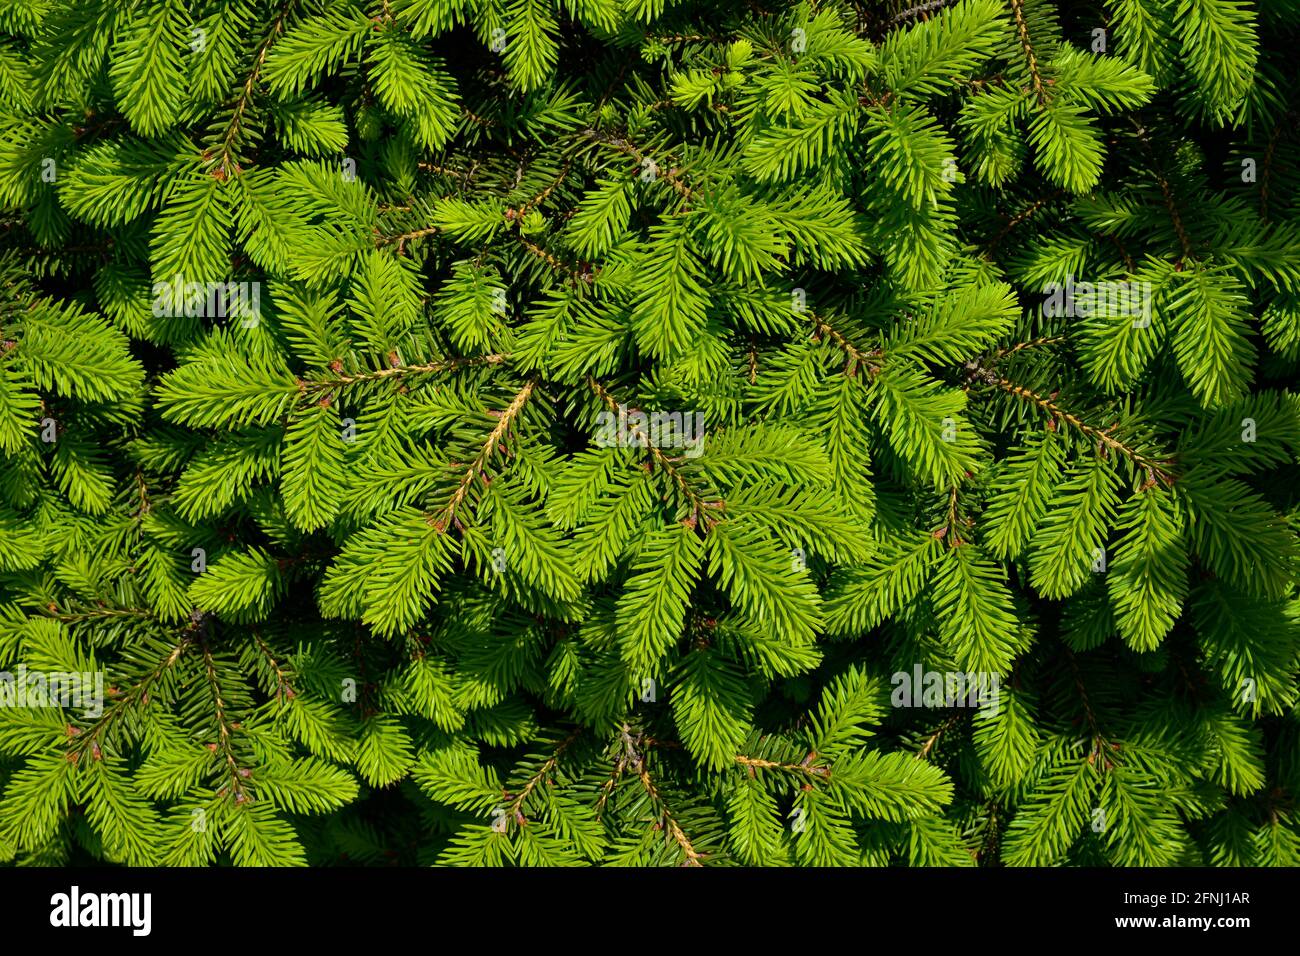 Norway spruce - Picea abies or European spruce with young shoots. Stock Photo